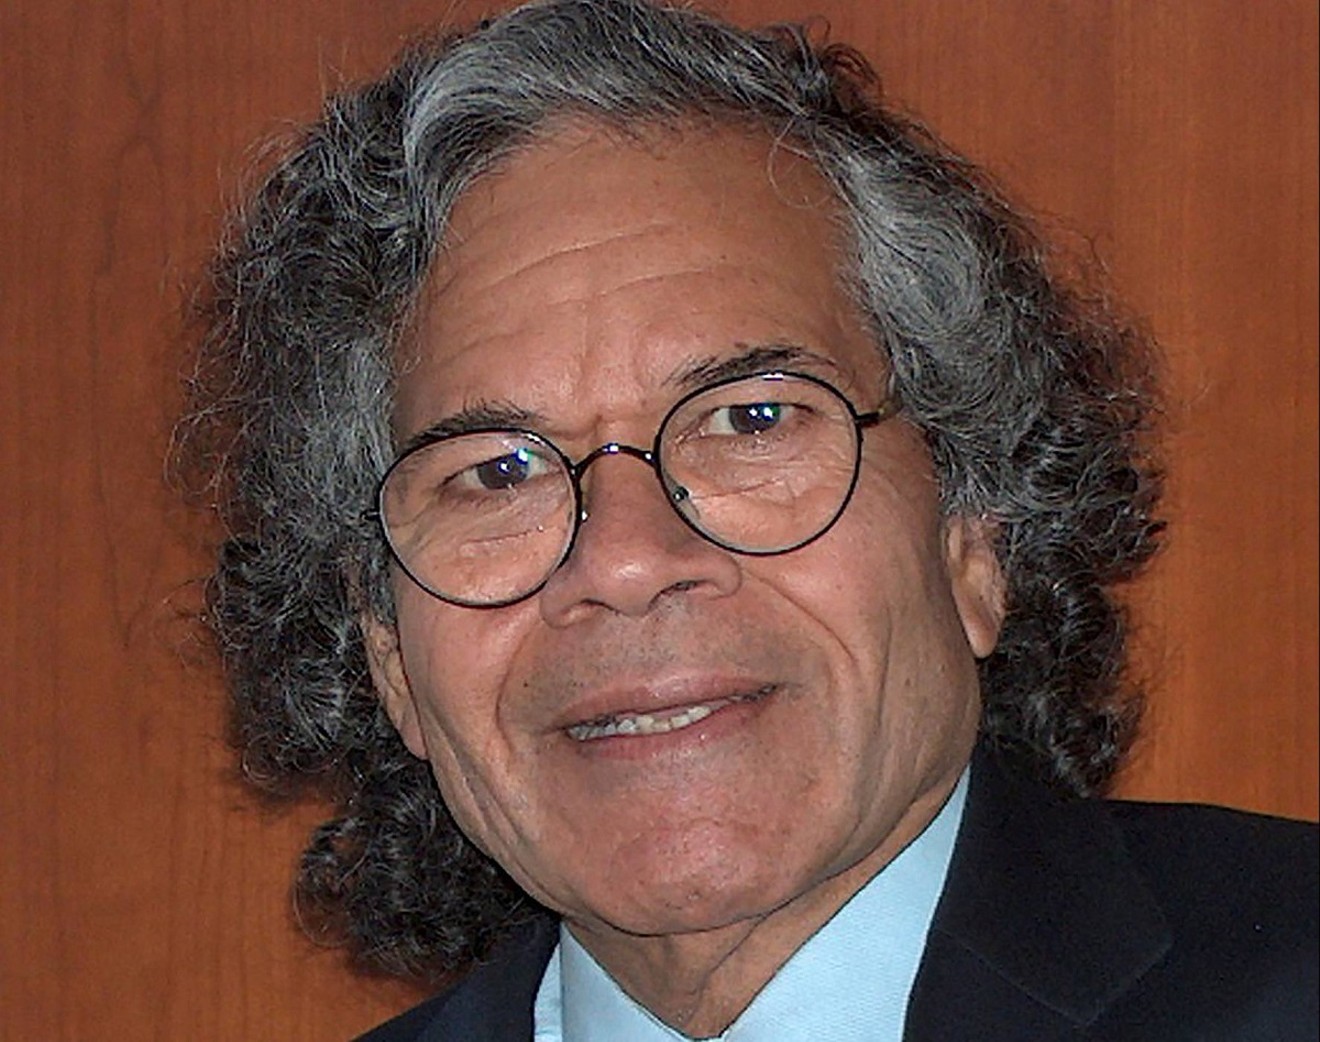 John Kapoor, founder and chairman of Insys Therapeutics, appeared in federal court on Thursday on bribery and conspiracy charges.